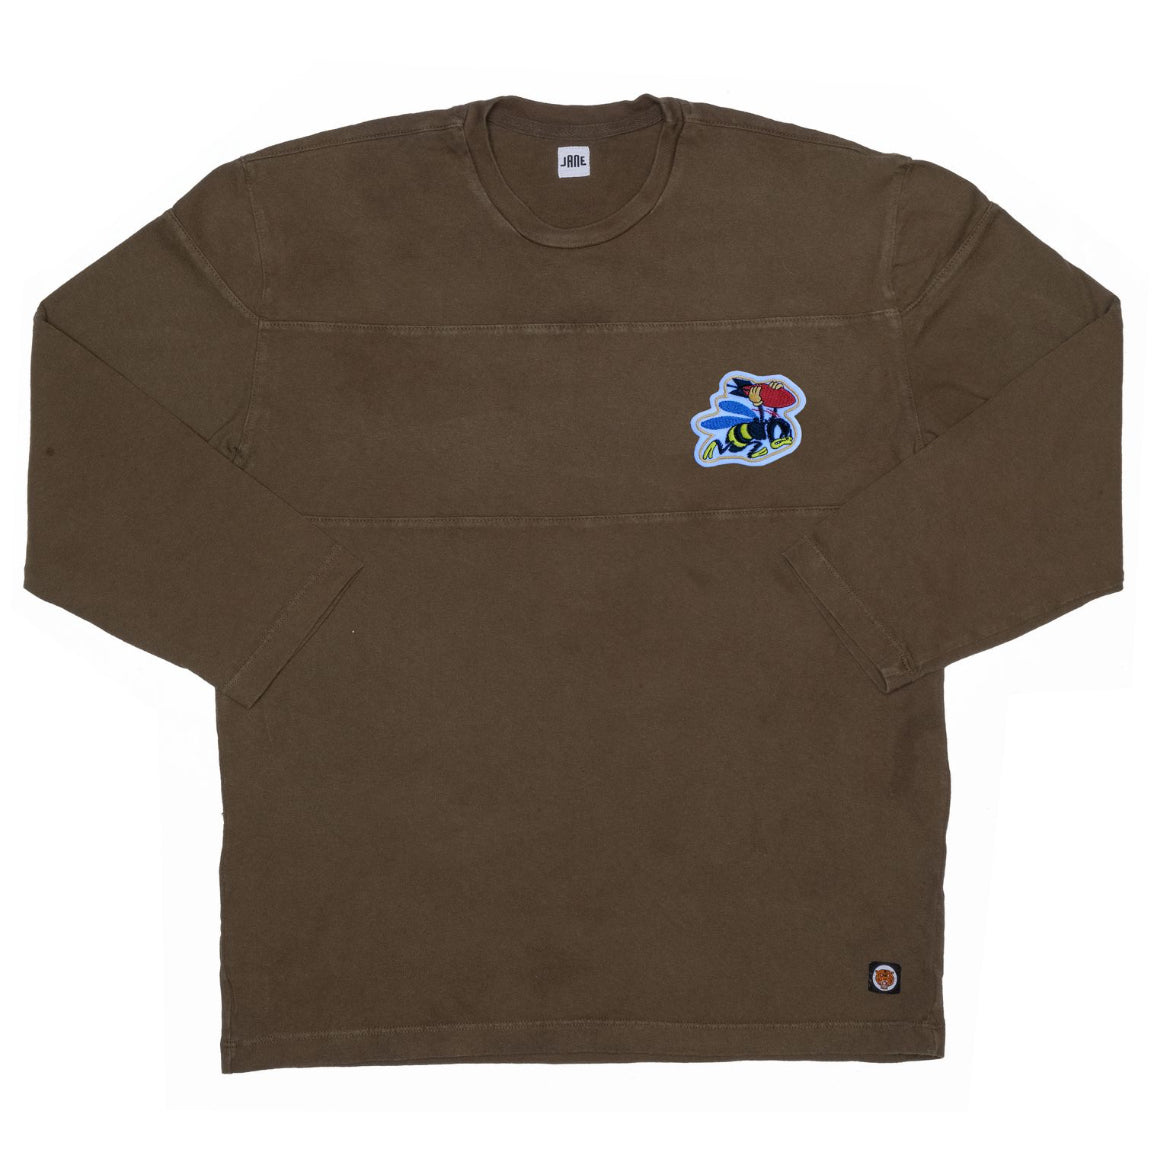 Garment Dyed Monroe Jersey - 21st Bombardier - Olive